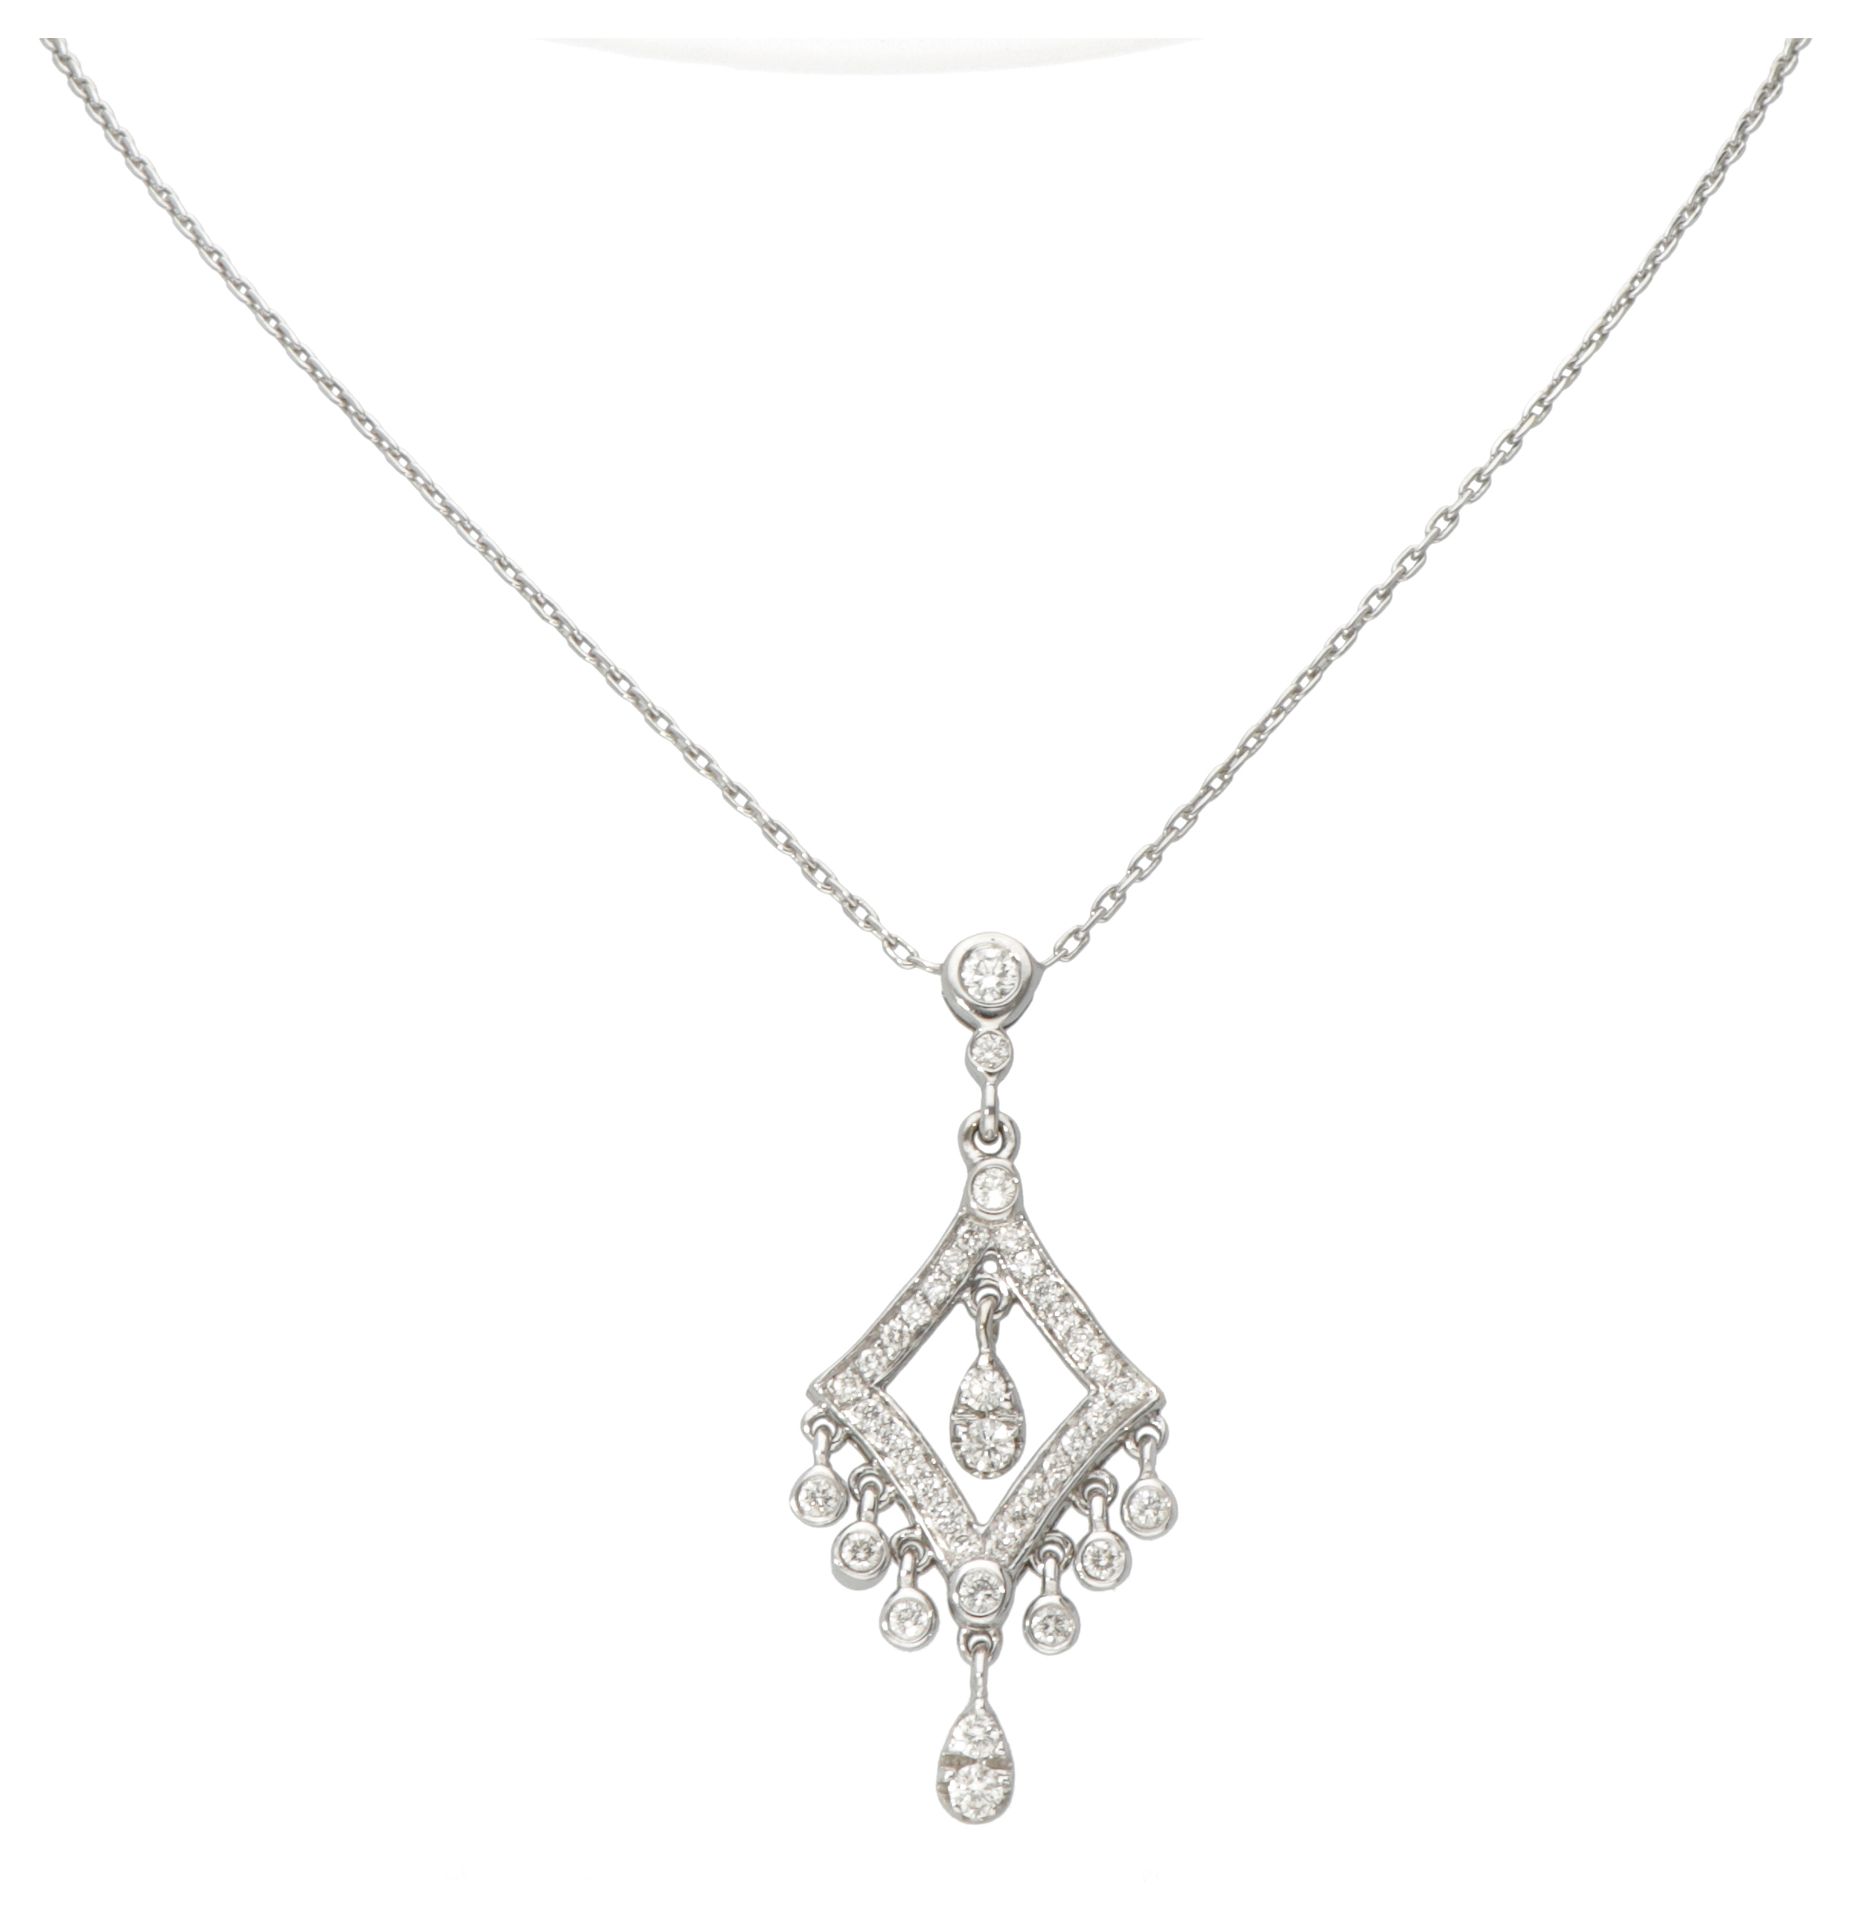 18K. White gold necklace and pendant set with approx. 0.62 ct. Diamond. 印章：750。镶&hellip;